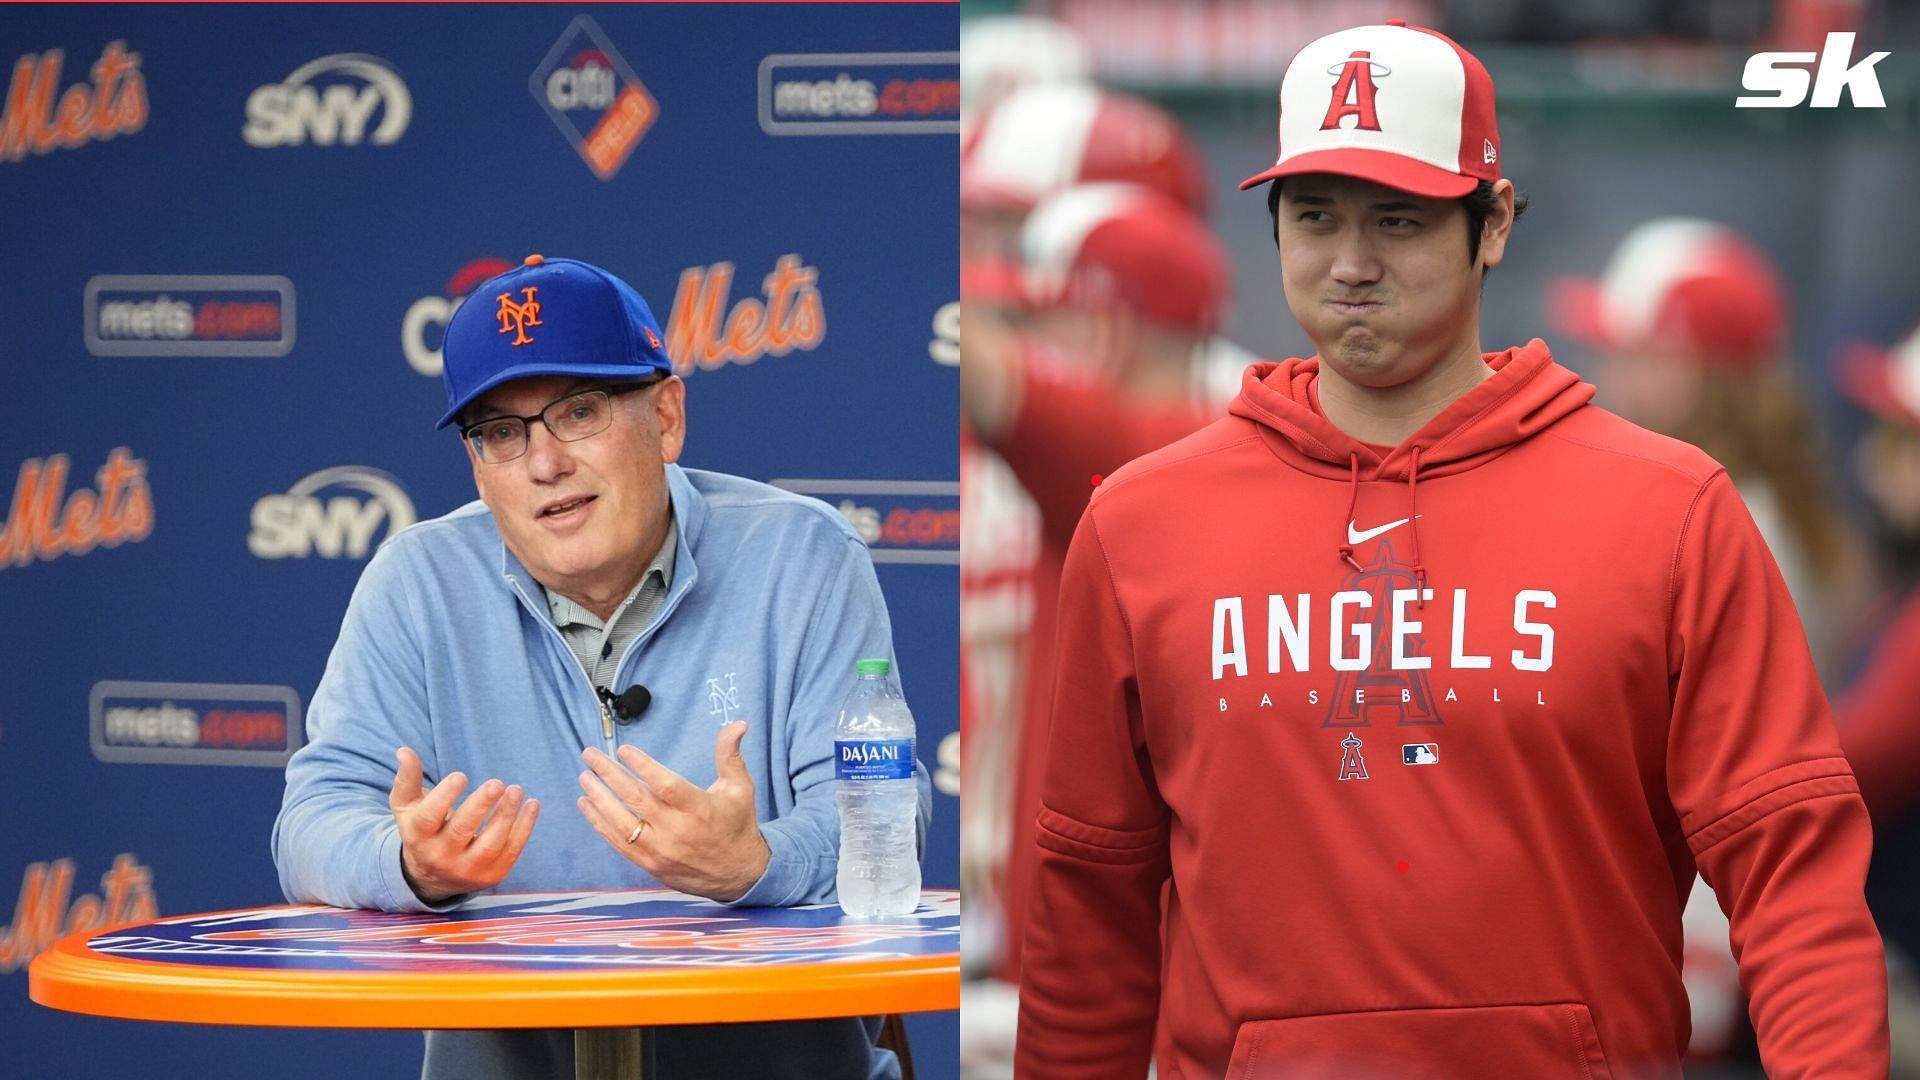 The New York Mets may have given up on Shohei Ohtani